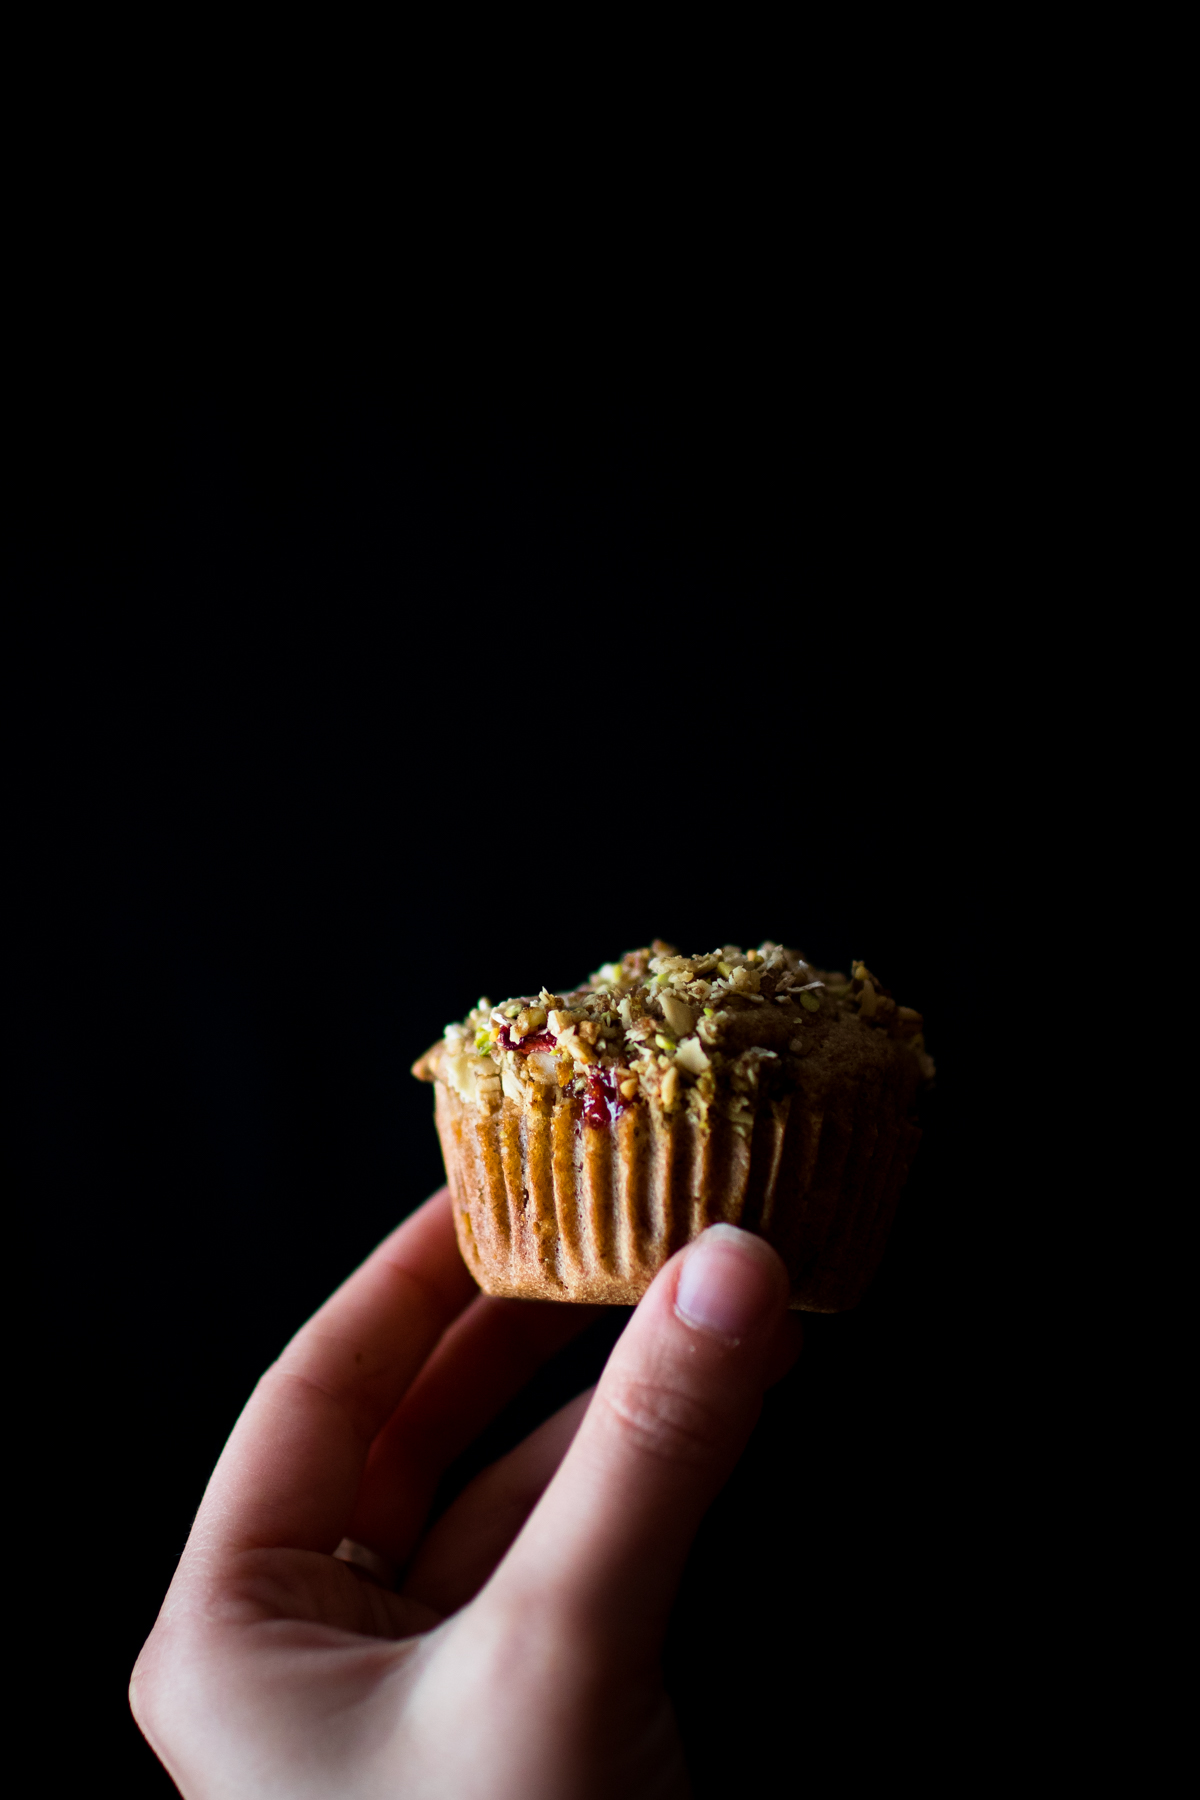 woman's hand holding a strawberry rhubarb muffin